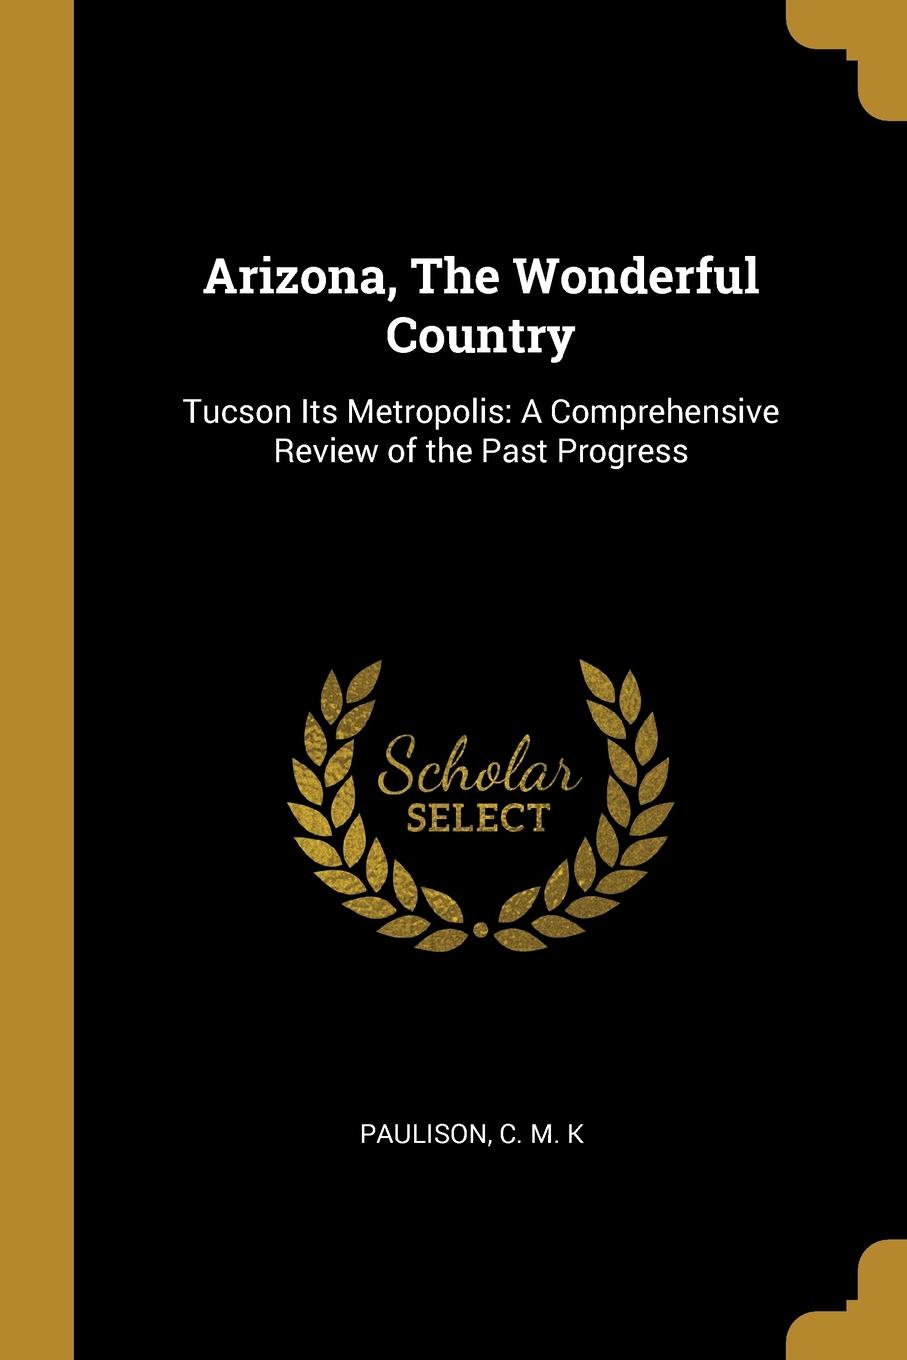 Arizona, The Wonderful Country. Tucson Its Metropolis: A Comprehensive Review of the Past Progress